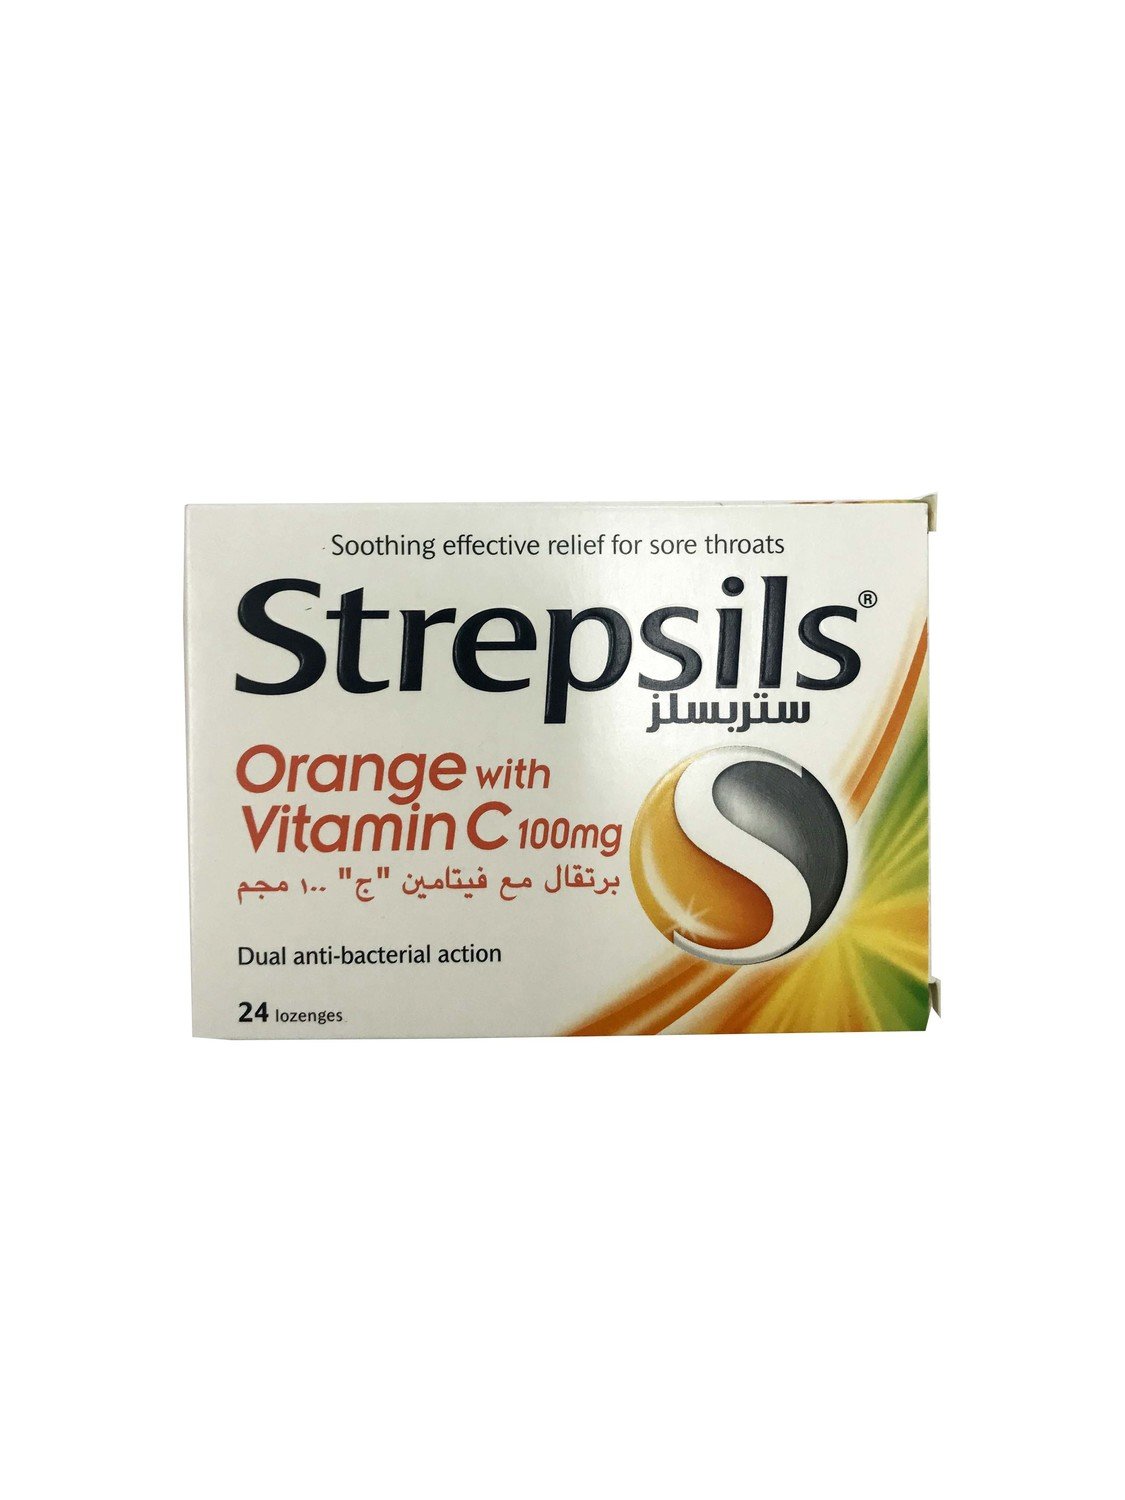 Strepsils Orange with Vitamin C 100mg Dual Anti-bacterial Action